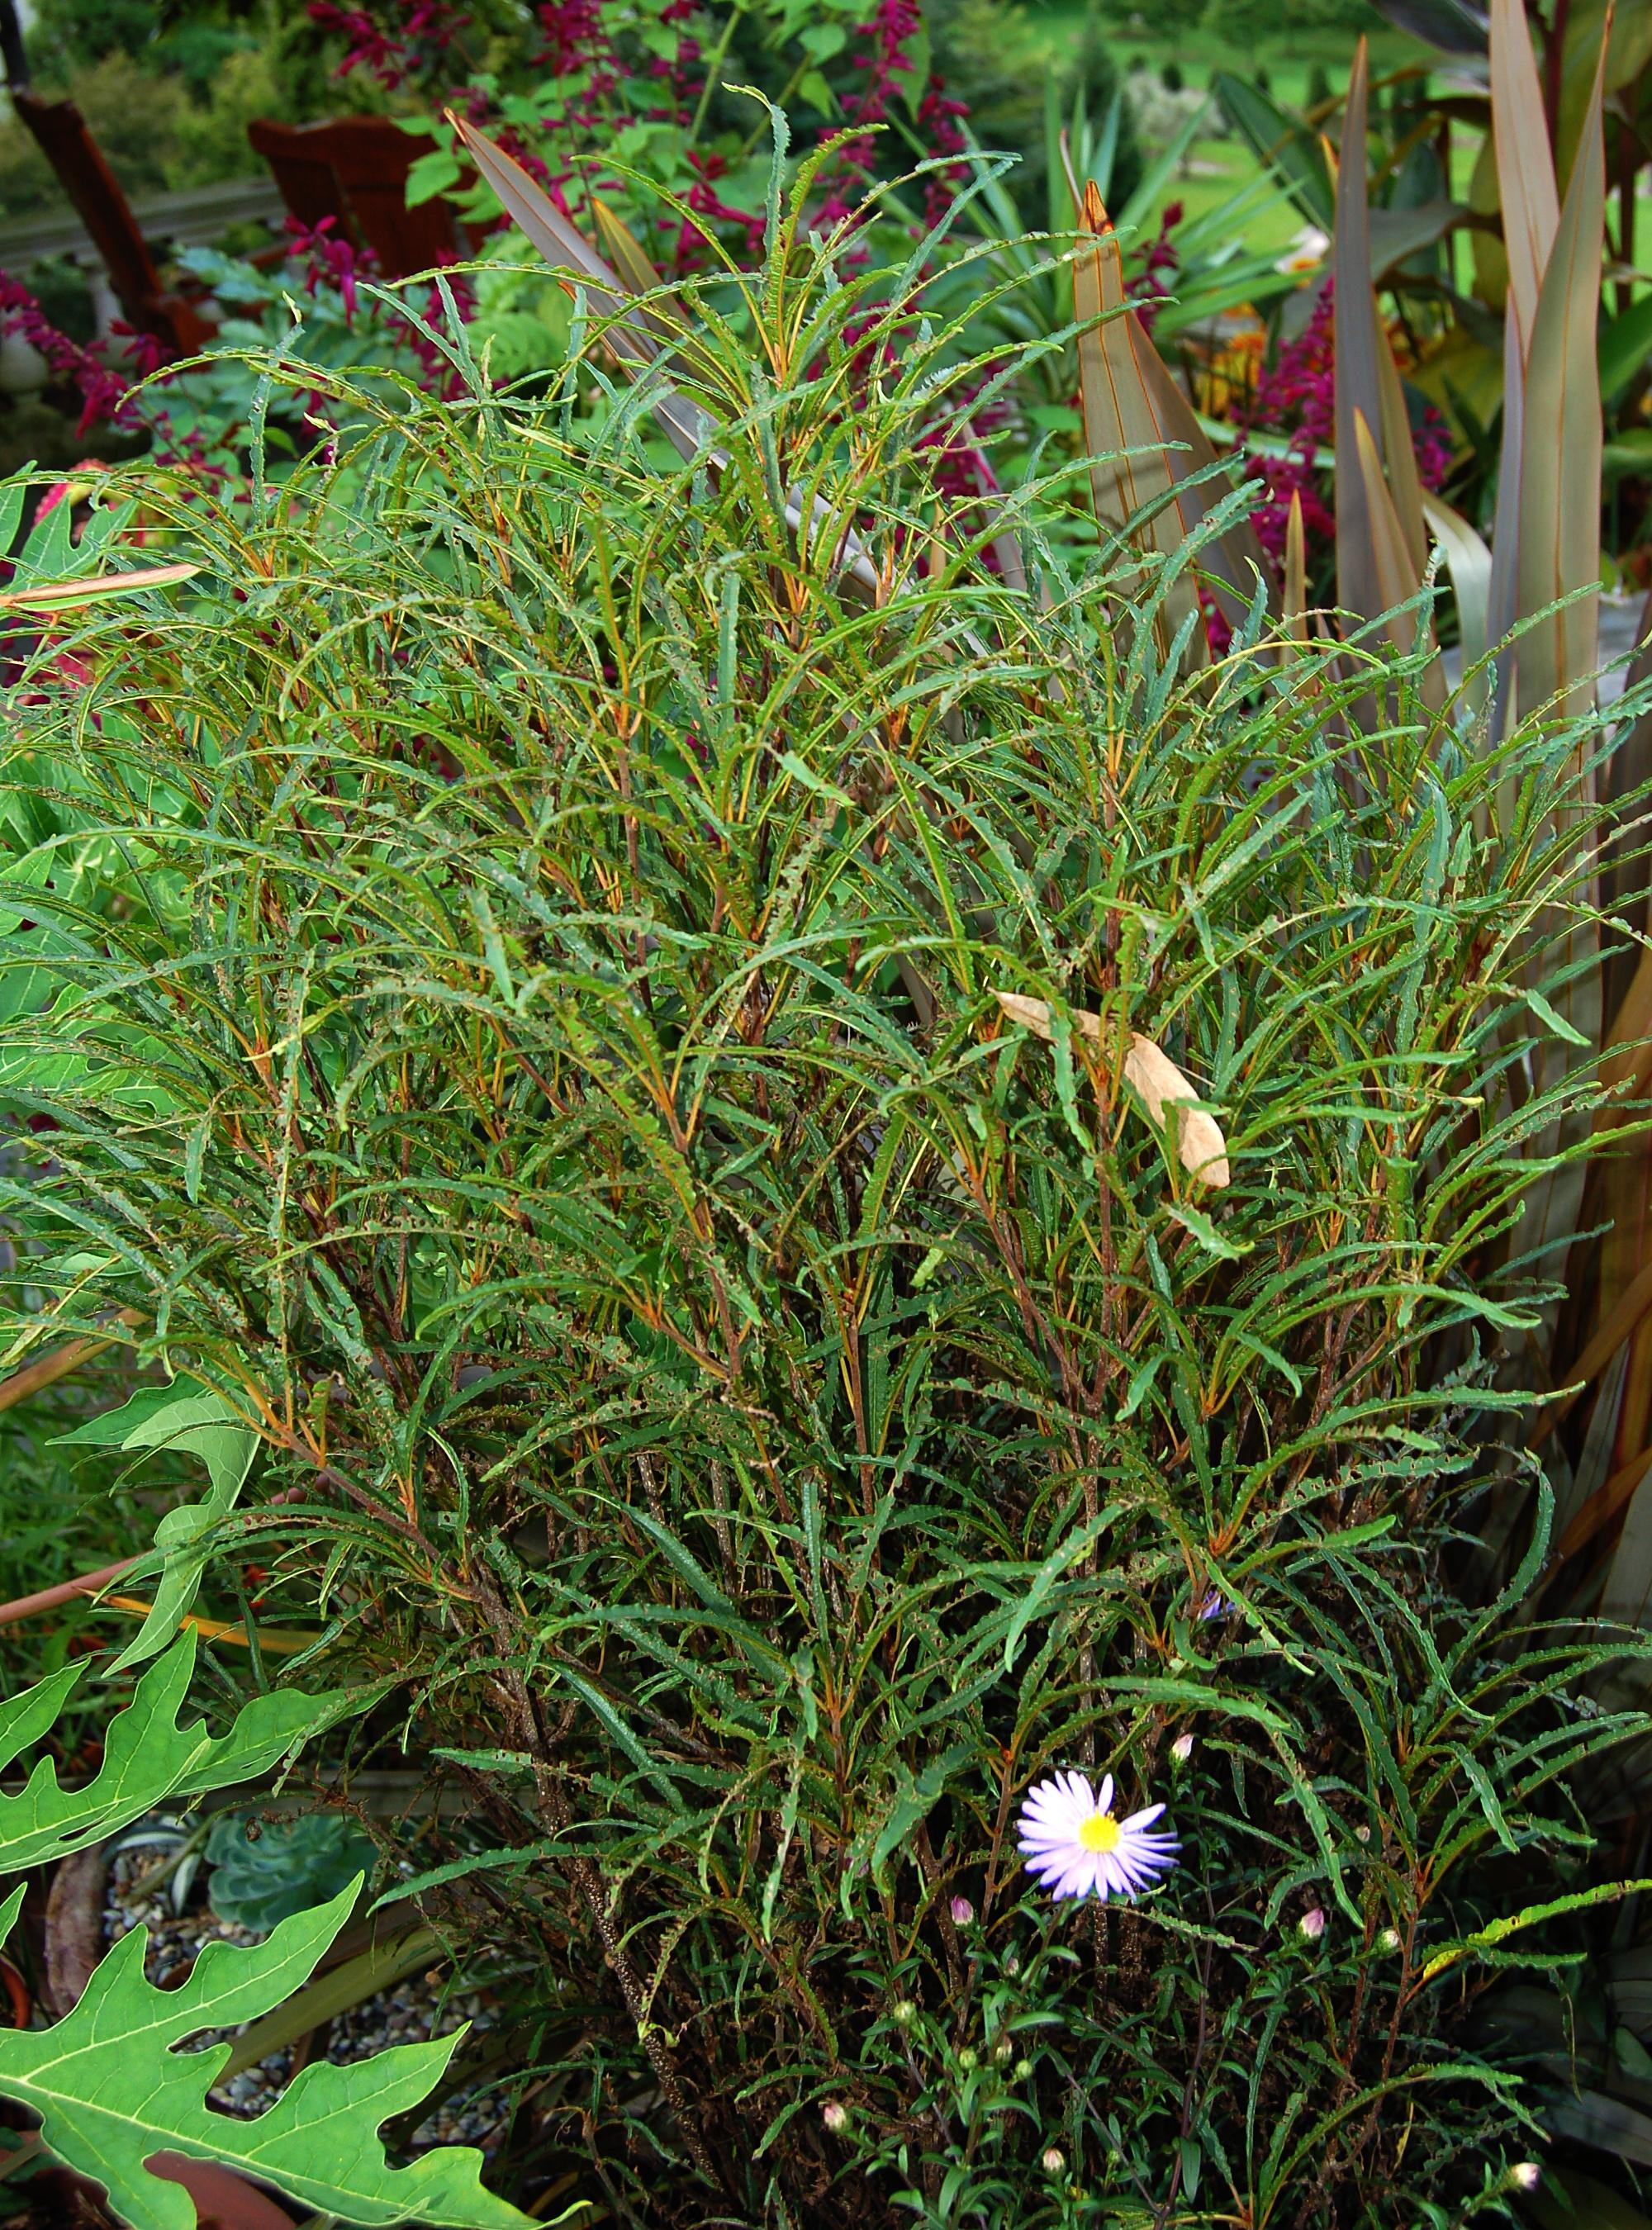 purple-white flower with yellow center, green foliage with orange-brown stems